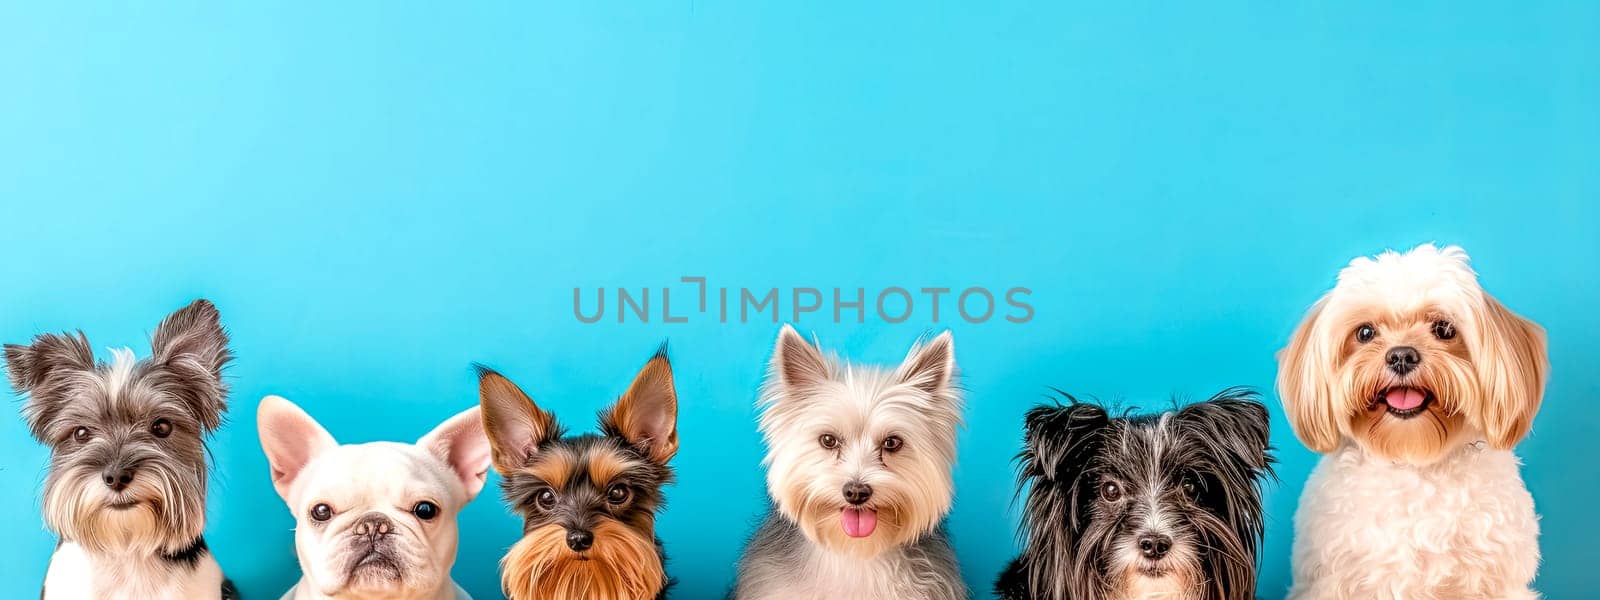 Adorable Group of Small Dog Breeds Posing Together on Blue Background.